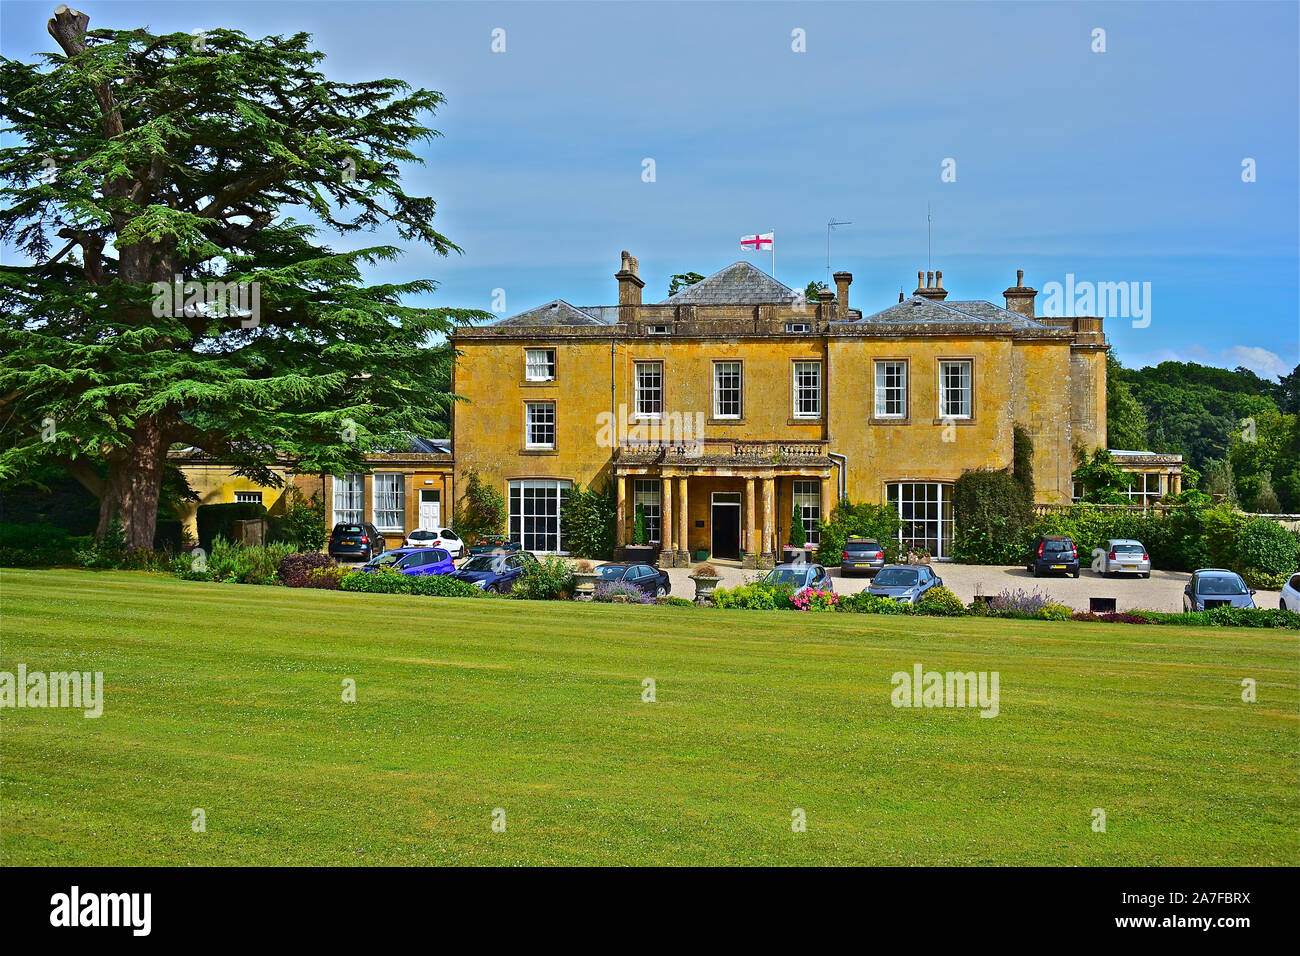 Cricket House Is A Small Former Country Manor House Now Occupied As A Hotel Used As Location For Tv Series To The Manor Born Stock Photo Alamy